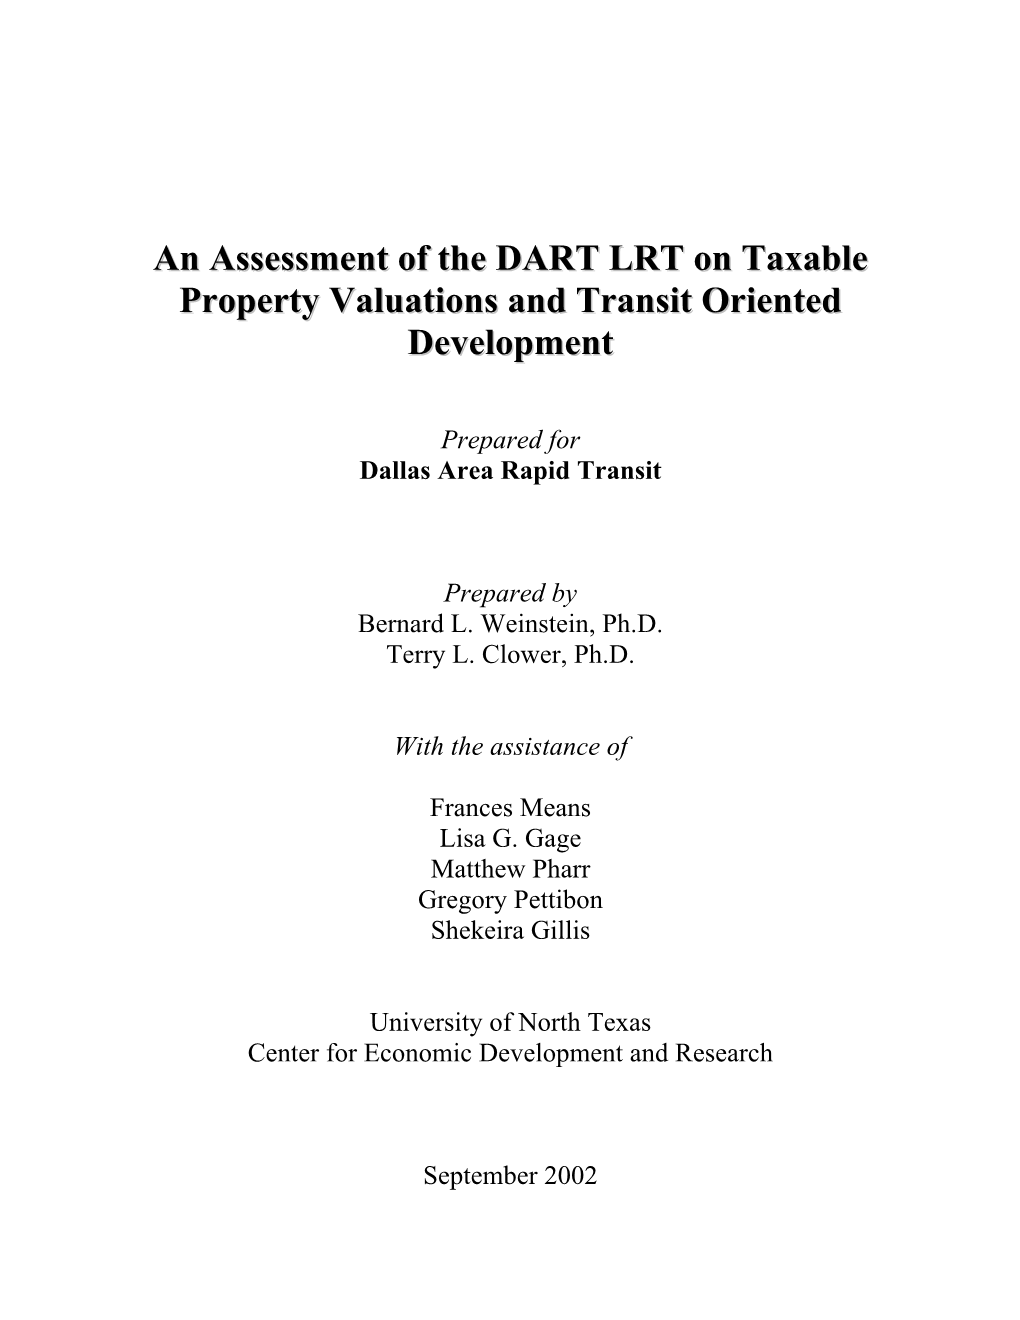 An Assessment of the DART LRT on Taxable Property Valuations and Transit Oriented Development